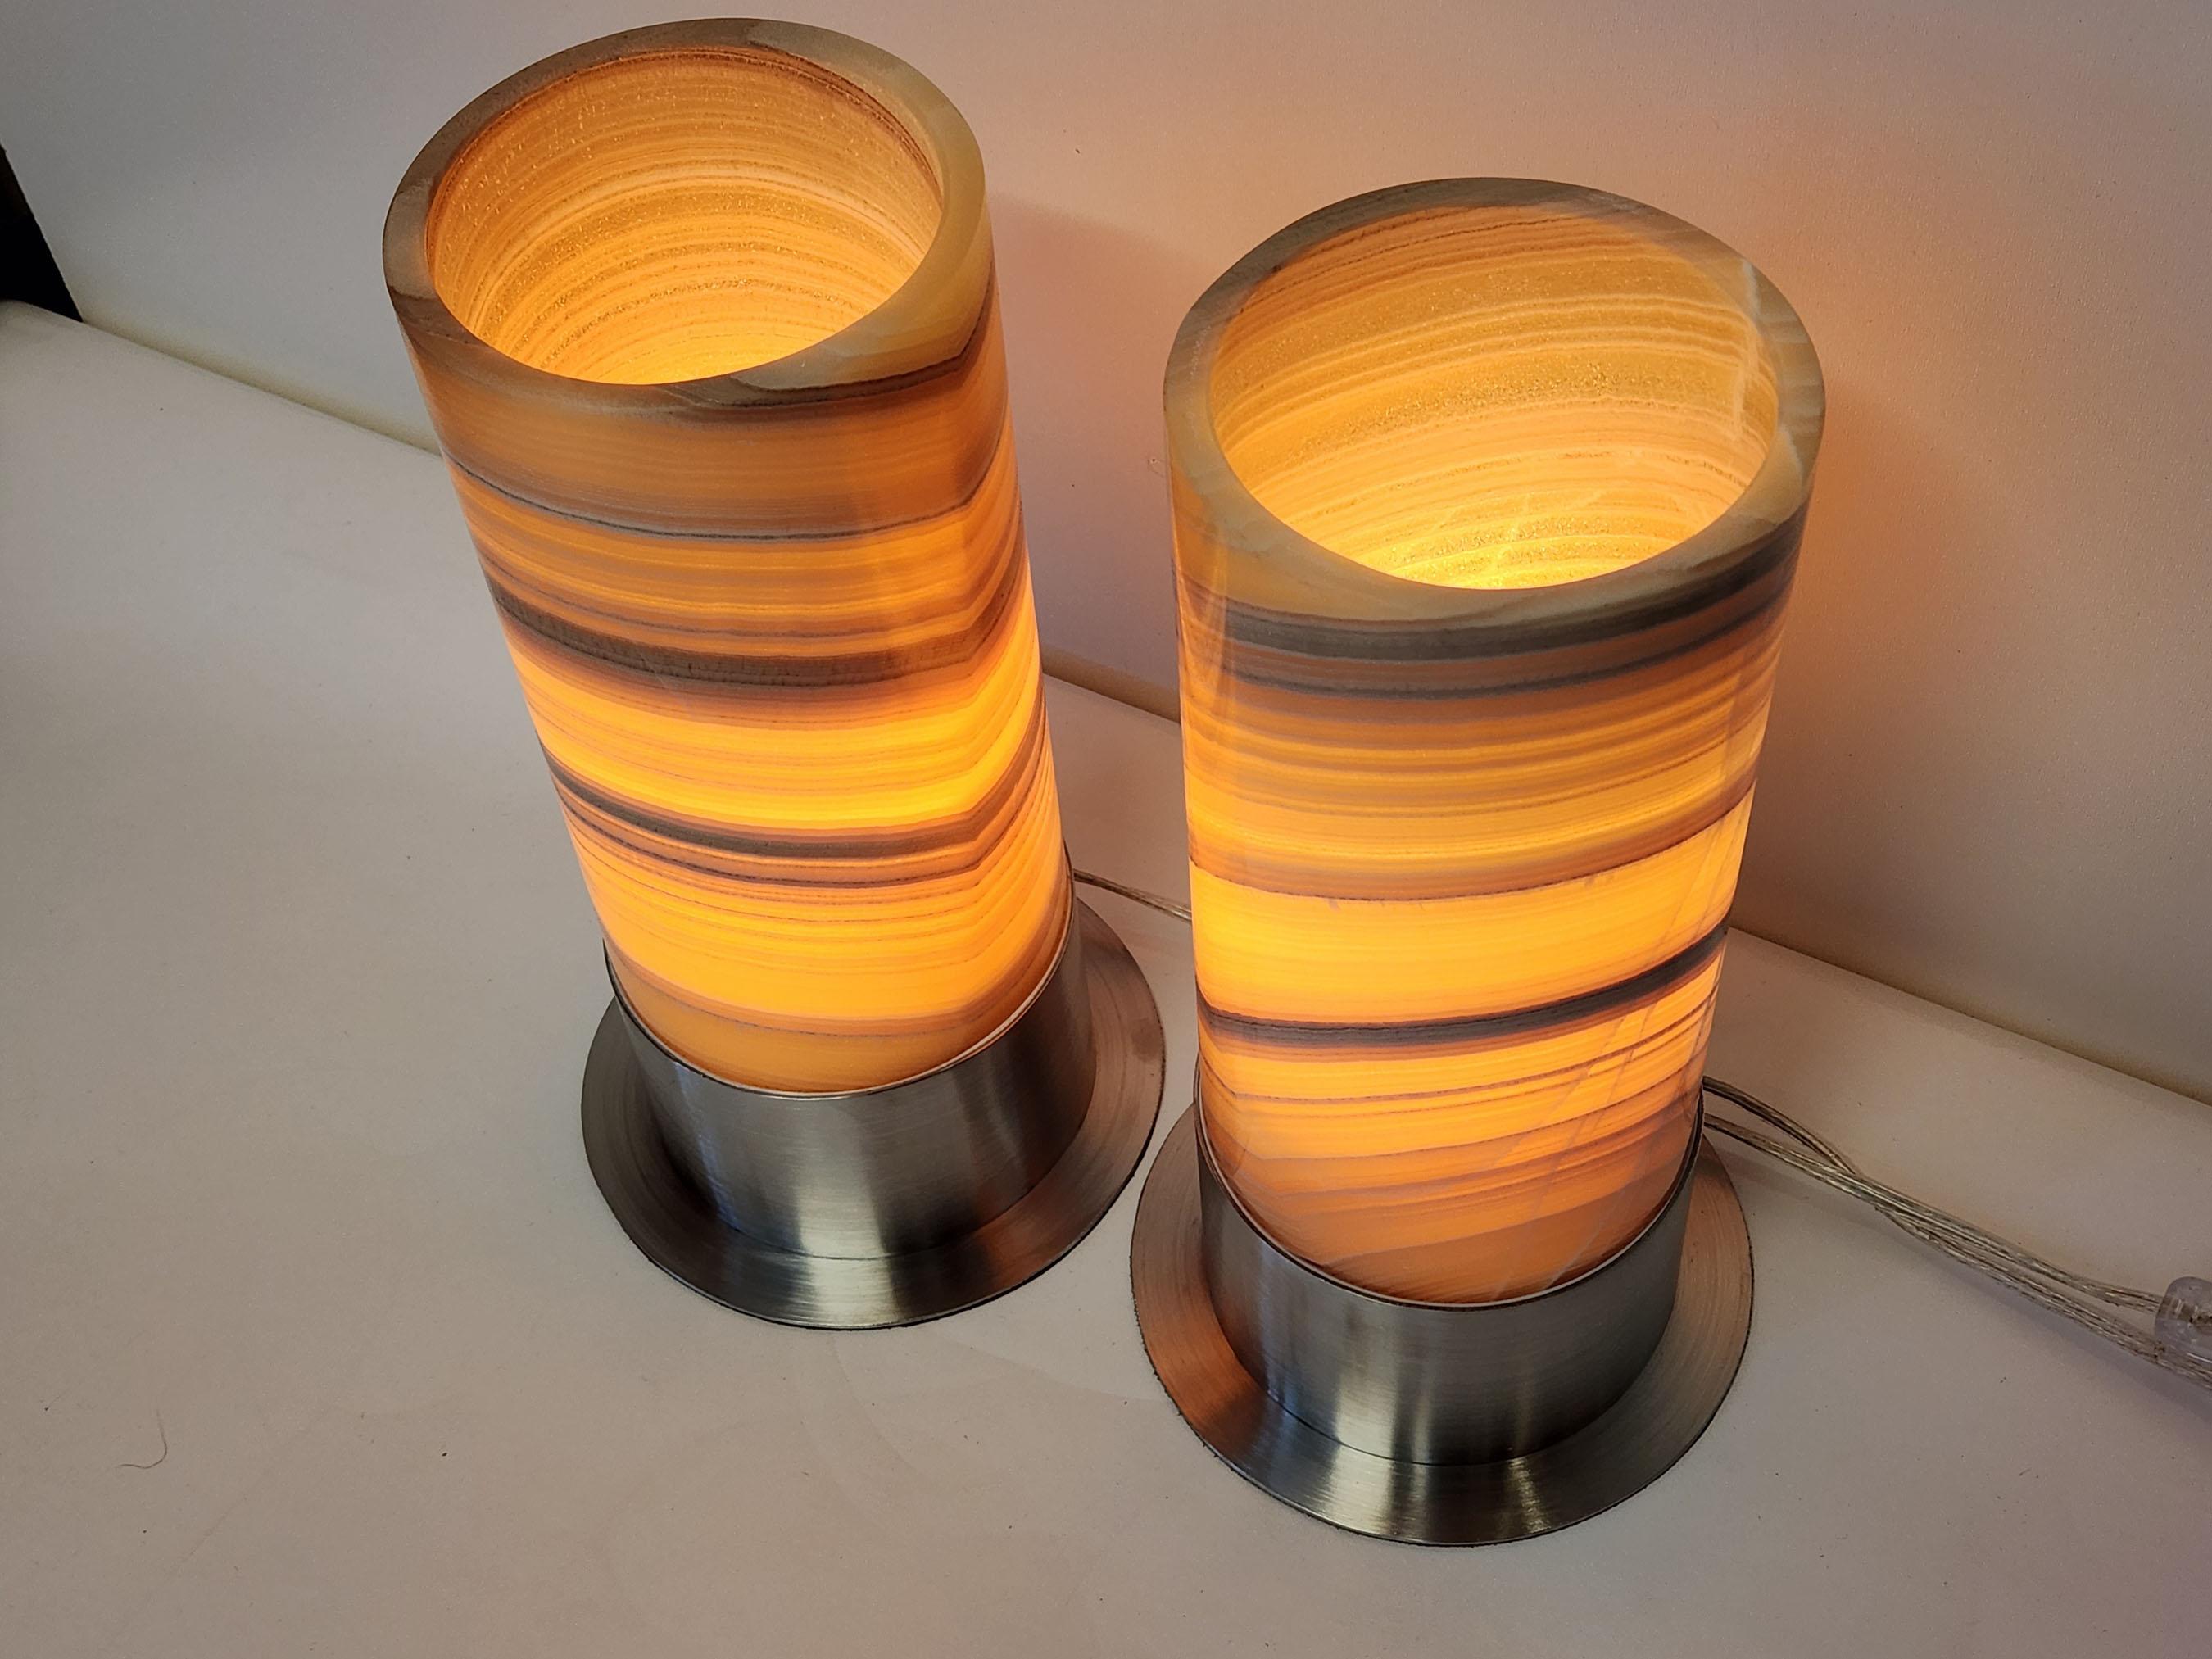 Set of 2 Ambient Onyx Table Lamps with Leather-Backed Stainless Steel Base In New Condition For Sale In Stratford, CT